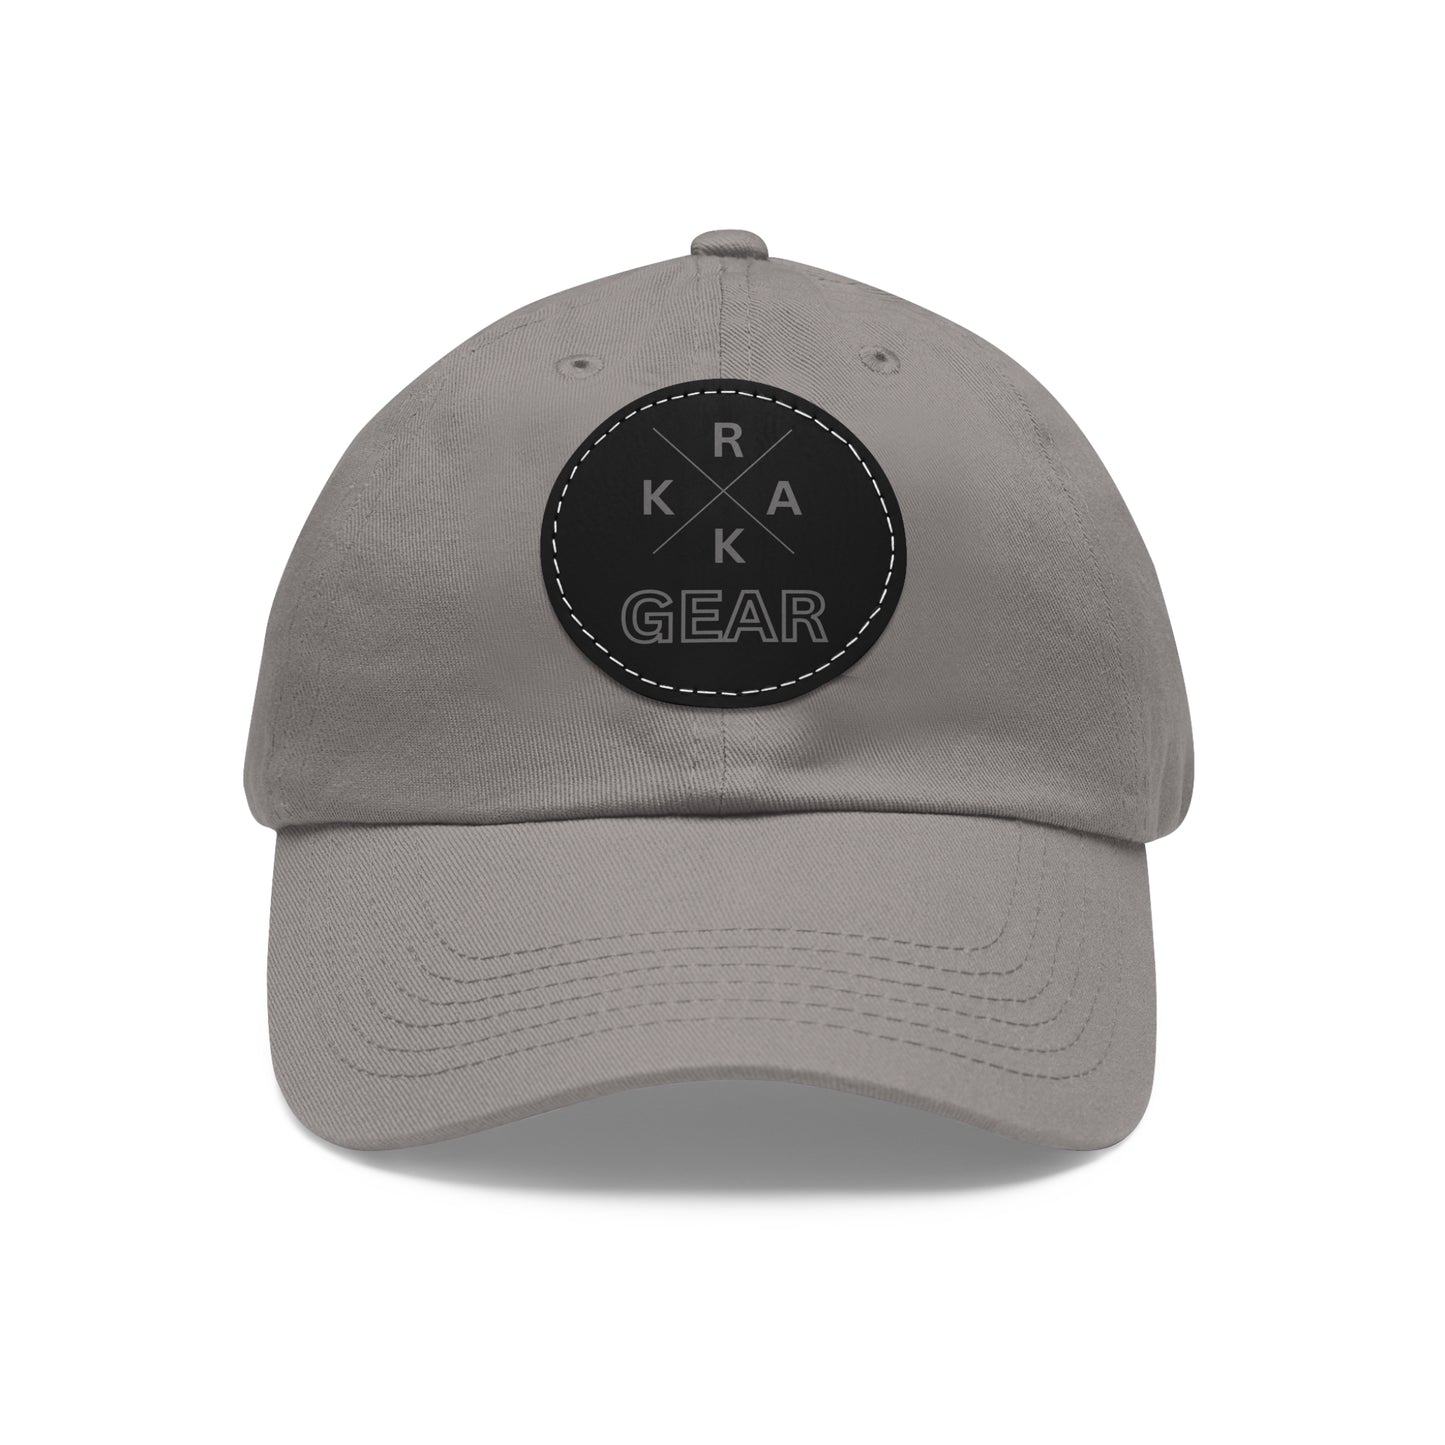 Rakkgear Grey Hat with Black Leather X Logo Patch: Cap featuring the iconic Rakkgear X Logo on a finely embroidered leather patch on the front